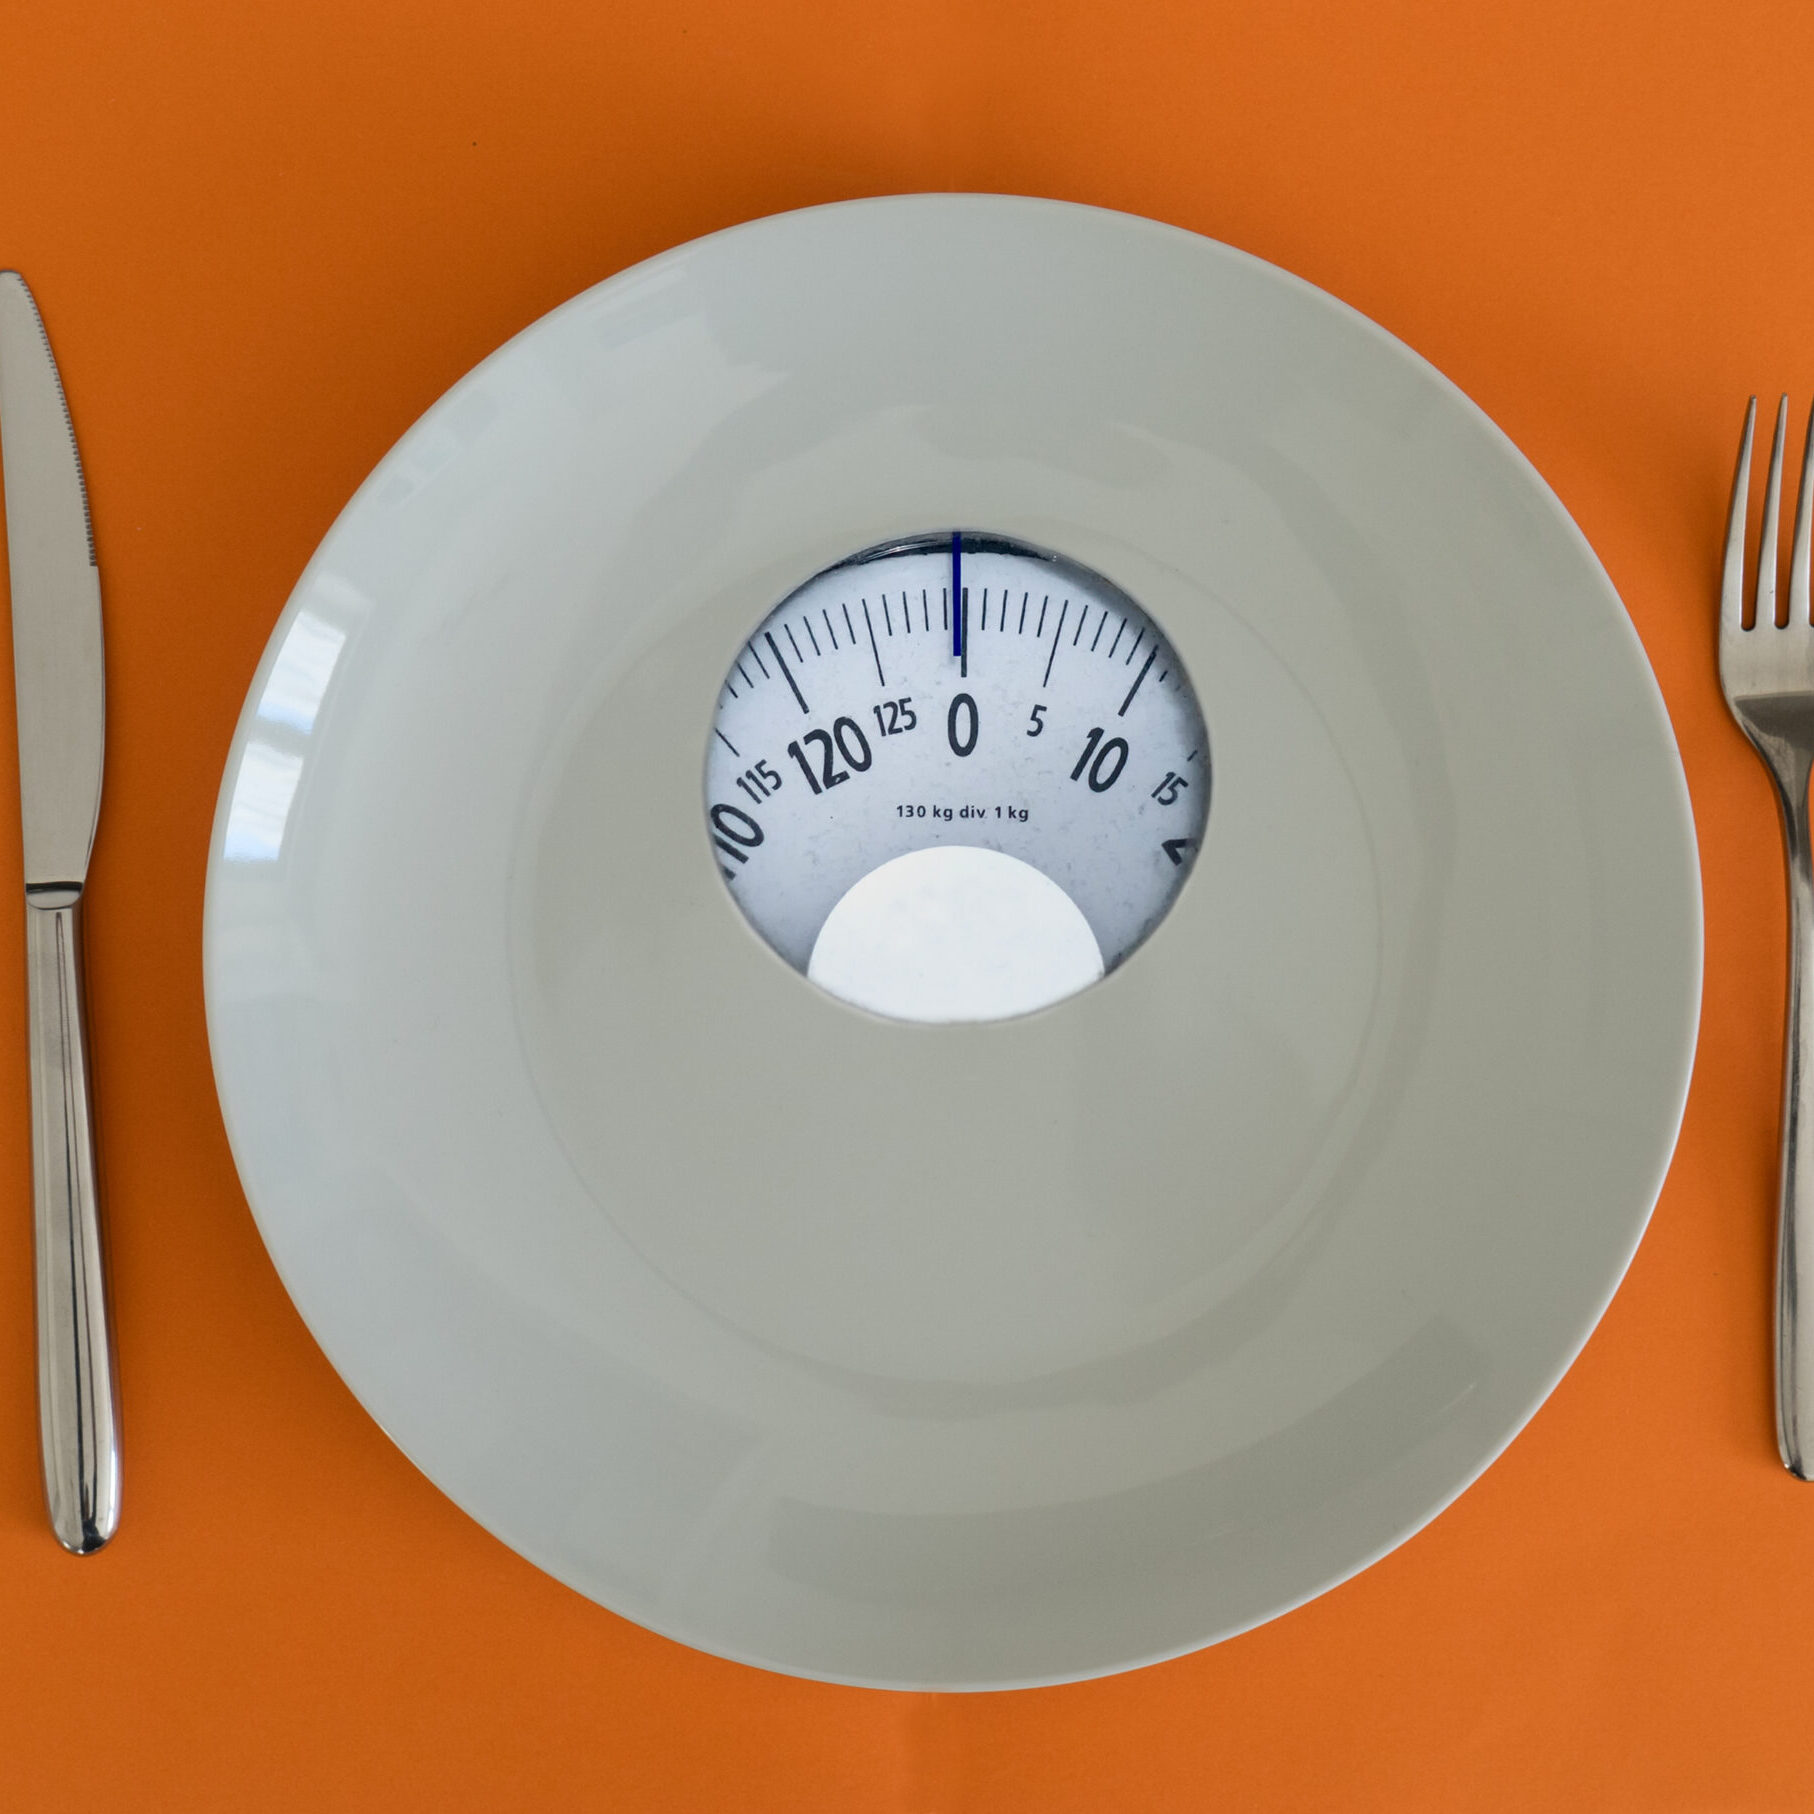 White plate with weight scale. Anorexia and eating disorder concept.